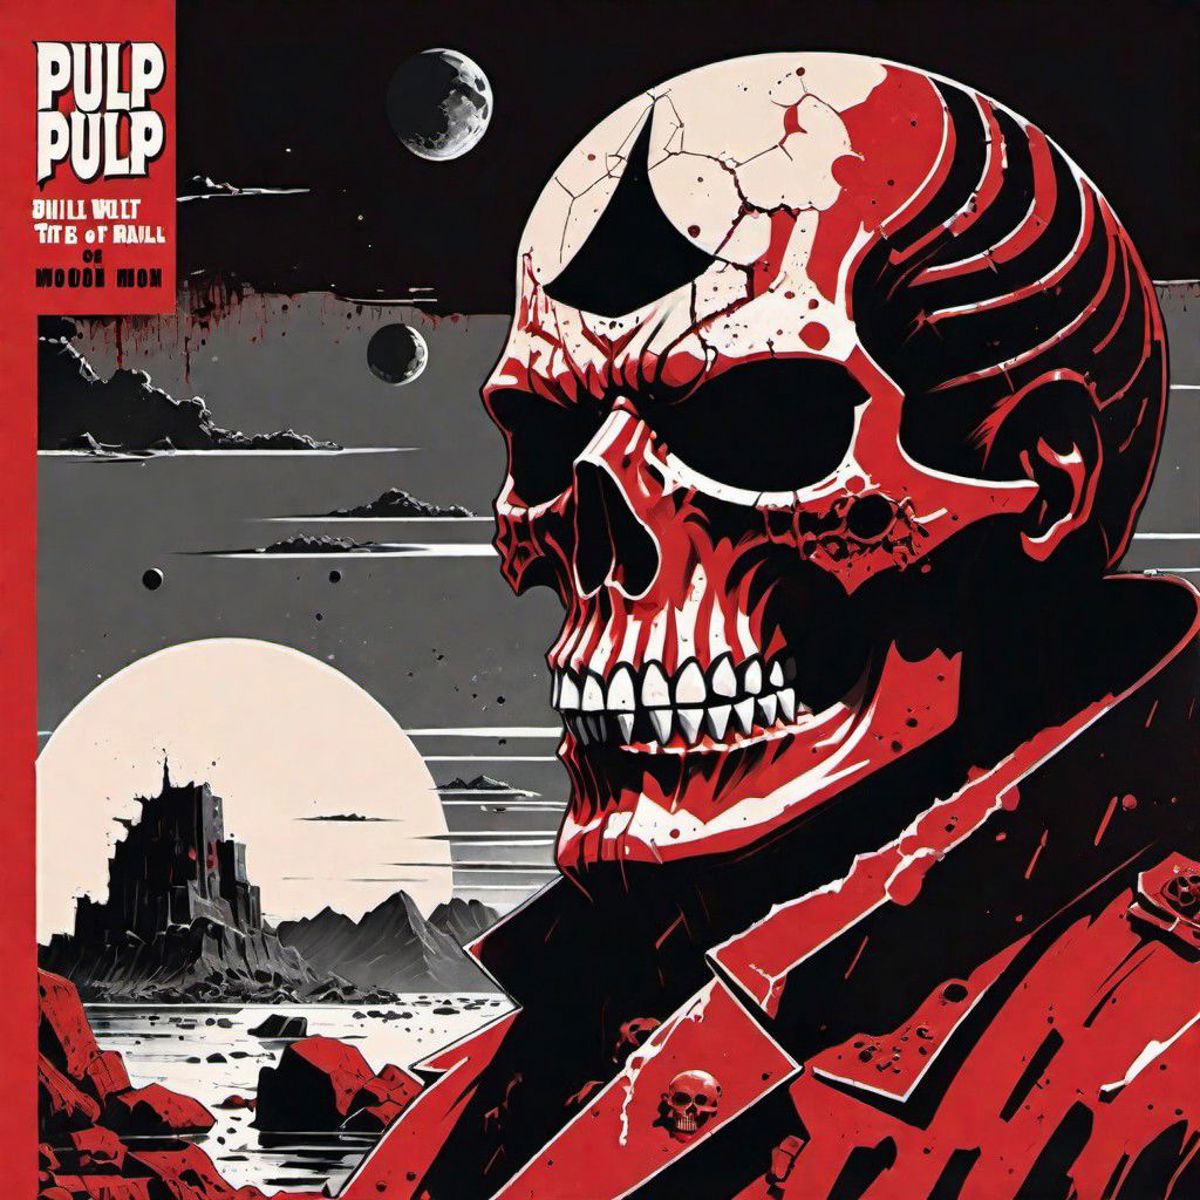 Pulp Cover Art image by prushik